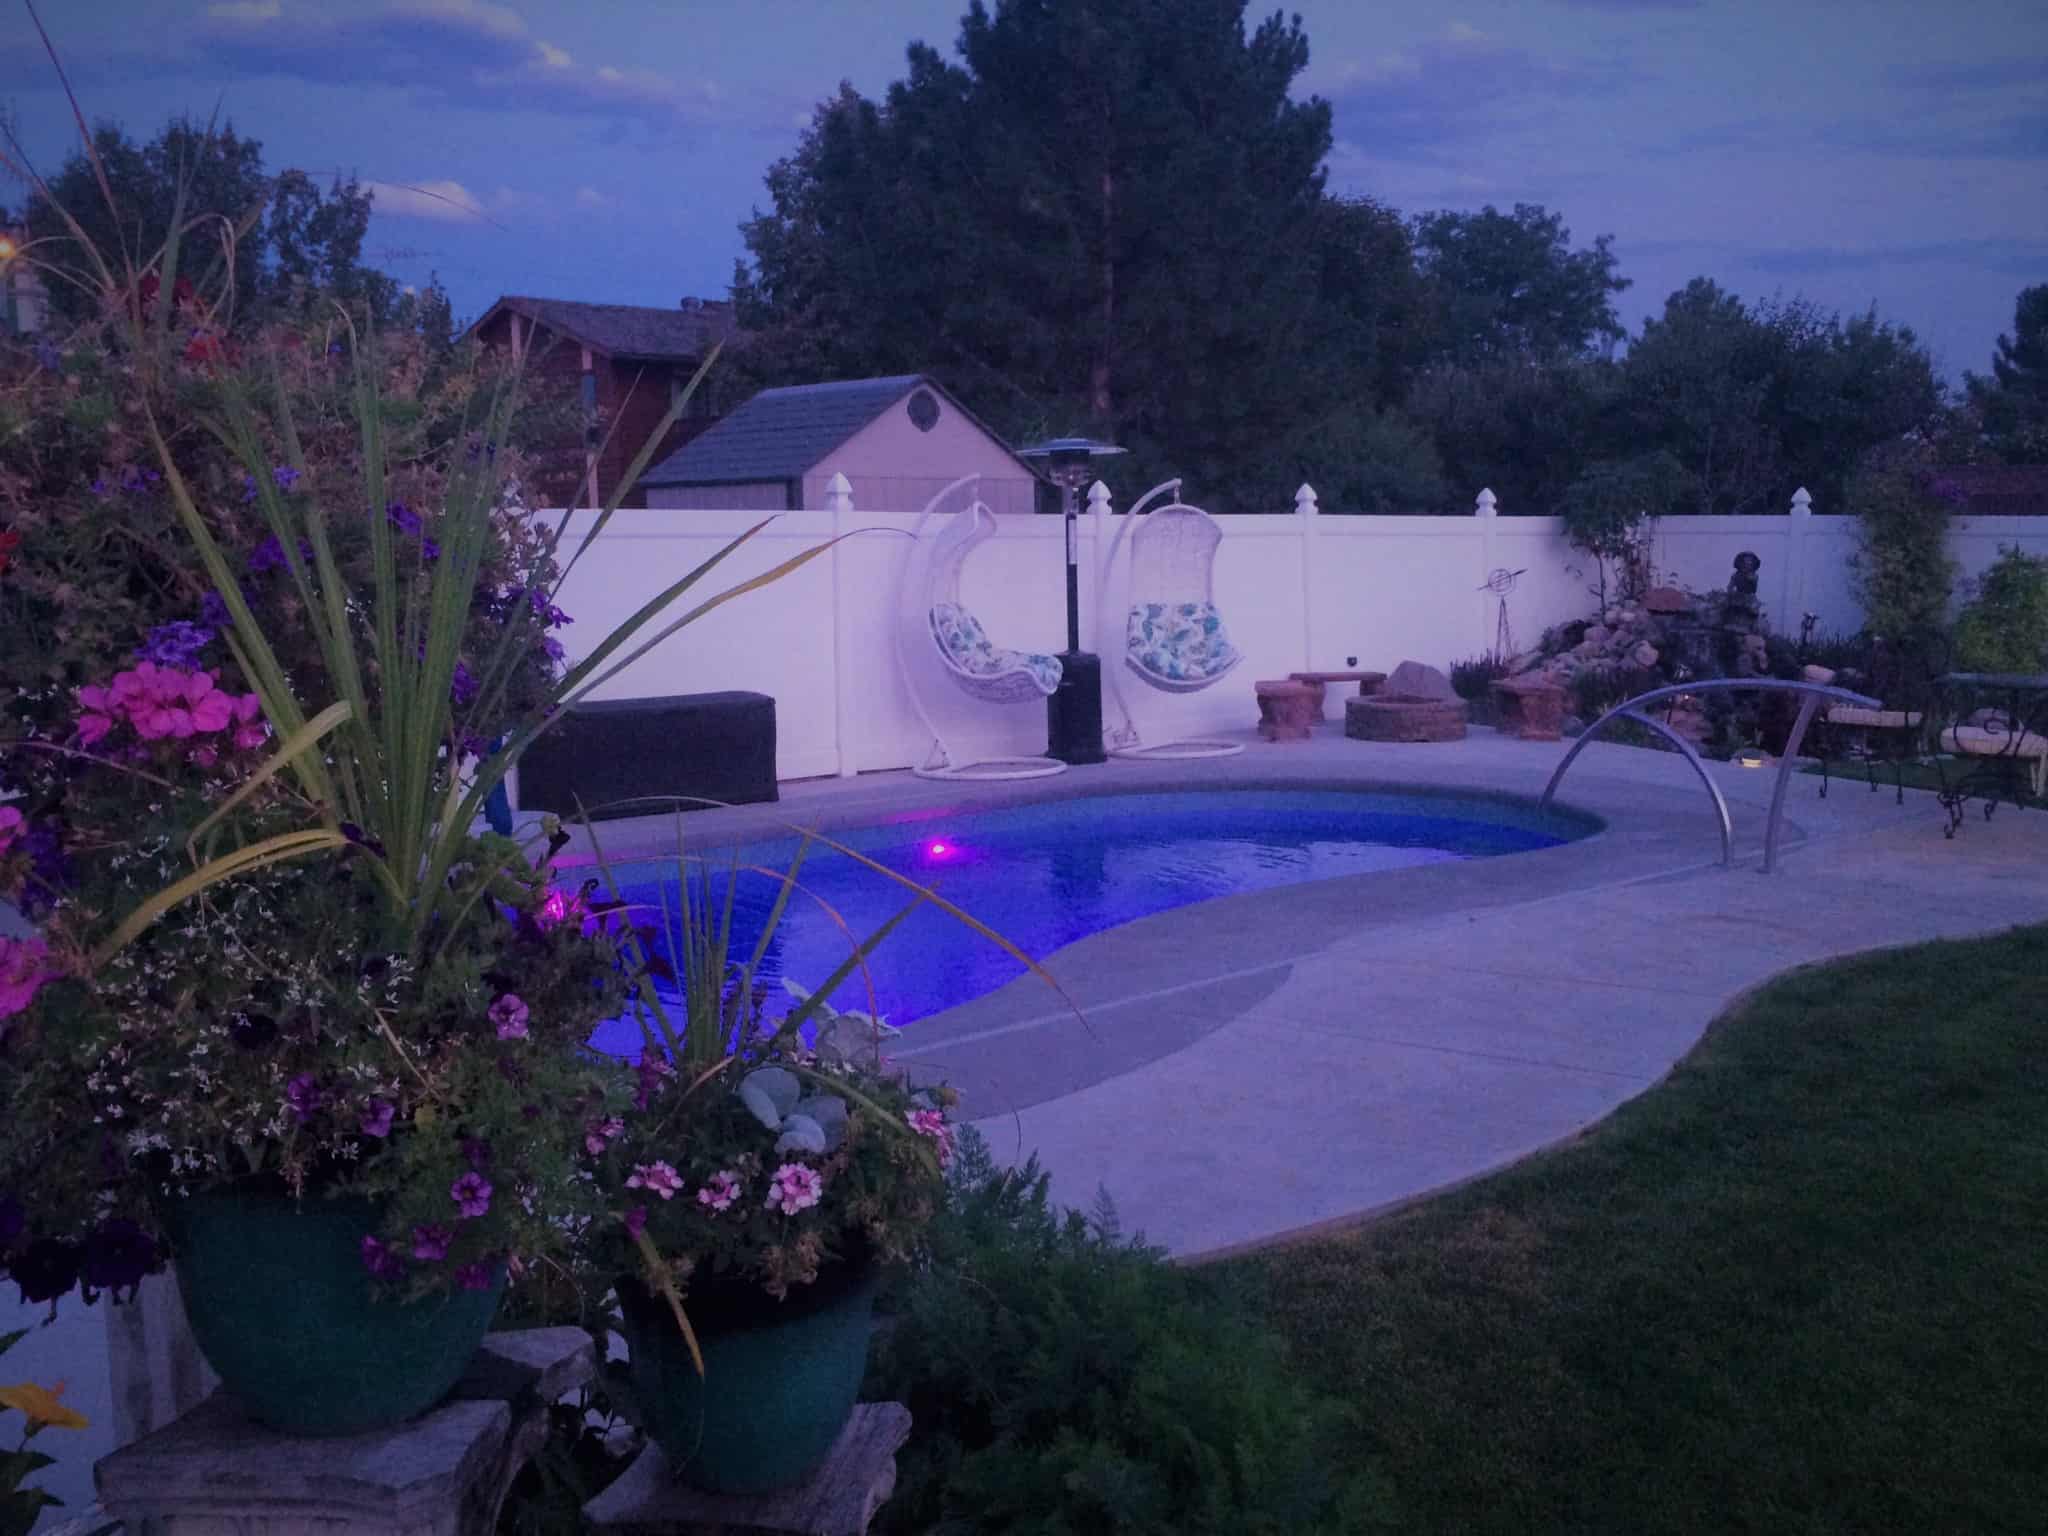 A completed fiberglass pool installation, ready for summer nights by the pool.